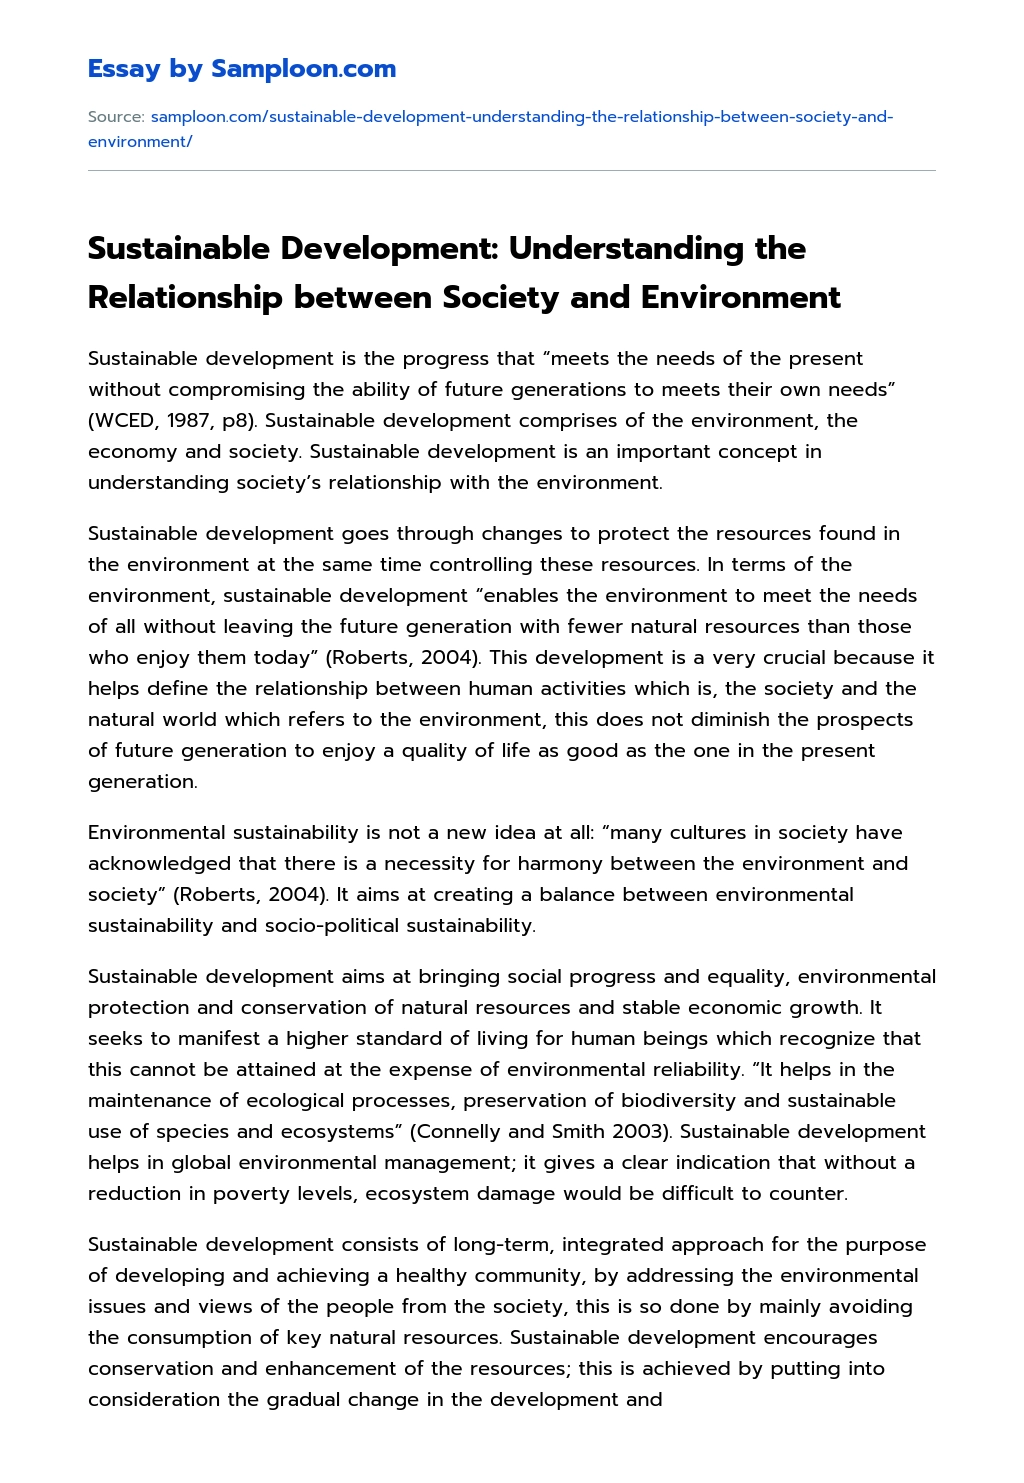 Sustainable Development: Understanding the Relationship between Society and Environment essay